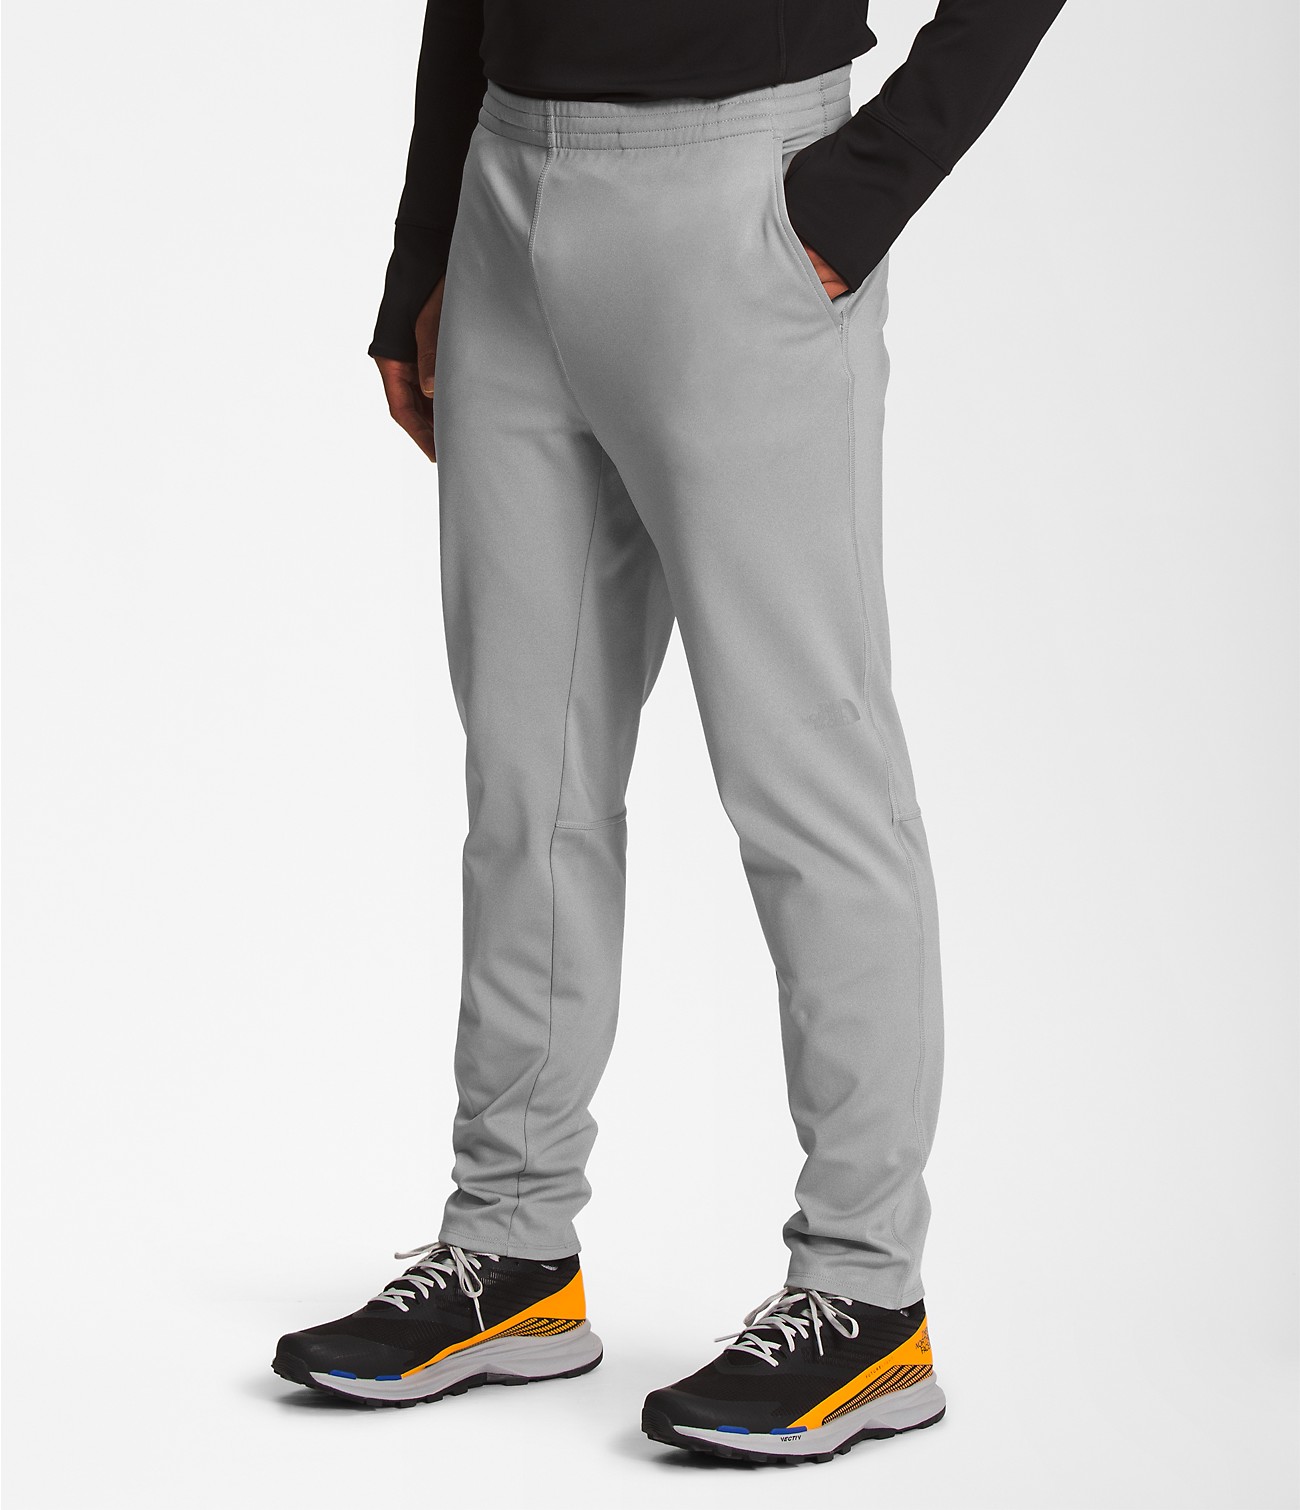 Men’s Winter Warm Essential Pants | The North Face